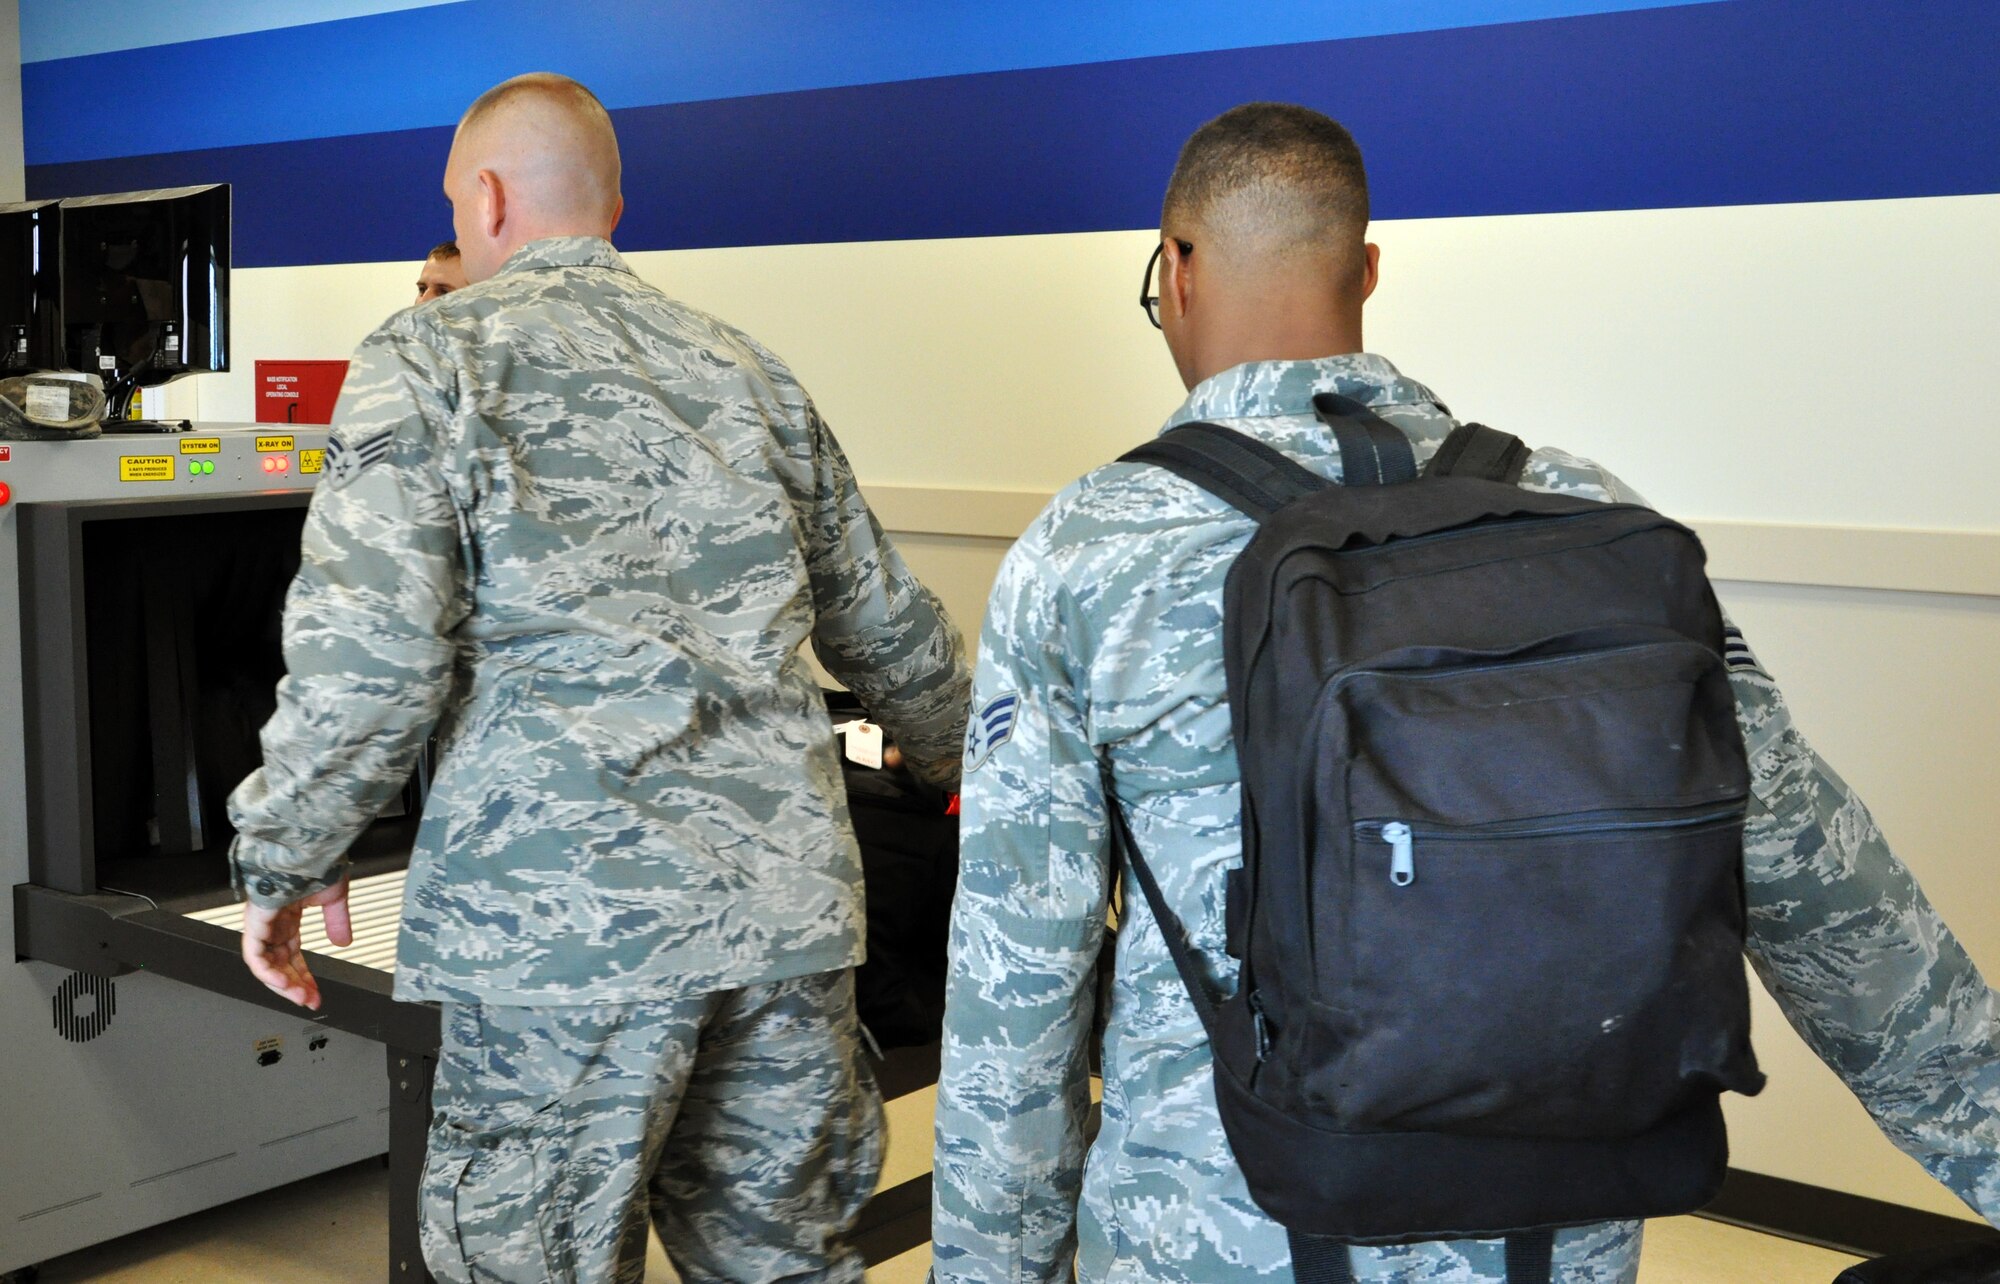 Members of the 931st Air Refueling Group make their way through the passenger terminal on their way to board an aircraft for a deployment from McConnell Air Force Base, Kan.  Several members of the 931 ARG have deployed to Southwest Asia.  (U.S. Air Force photo by Capt. Zach Anderson)